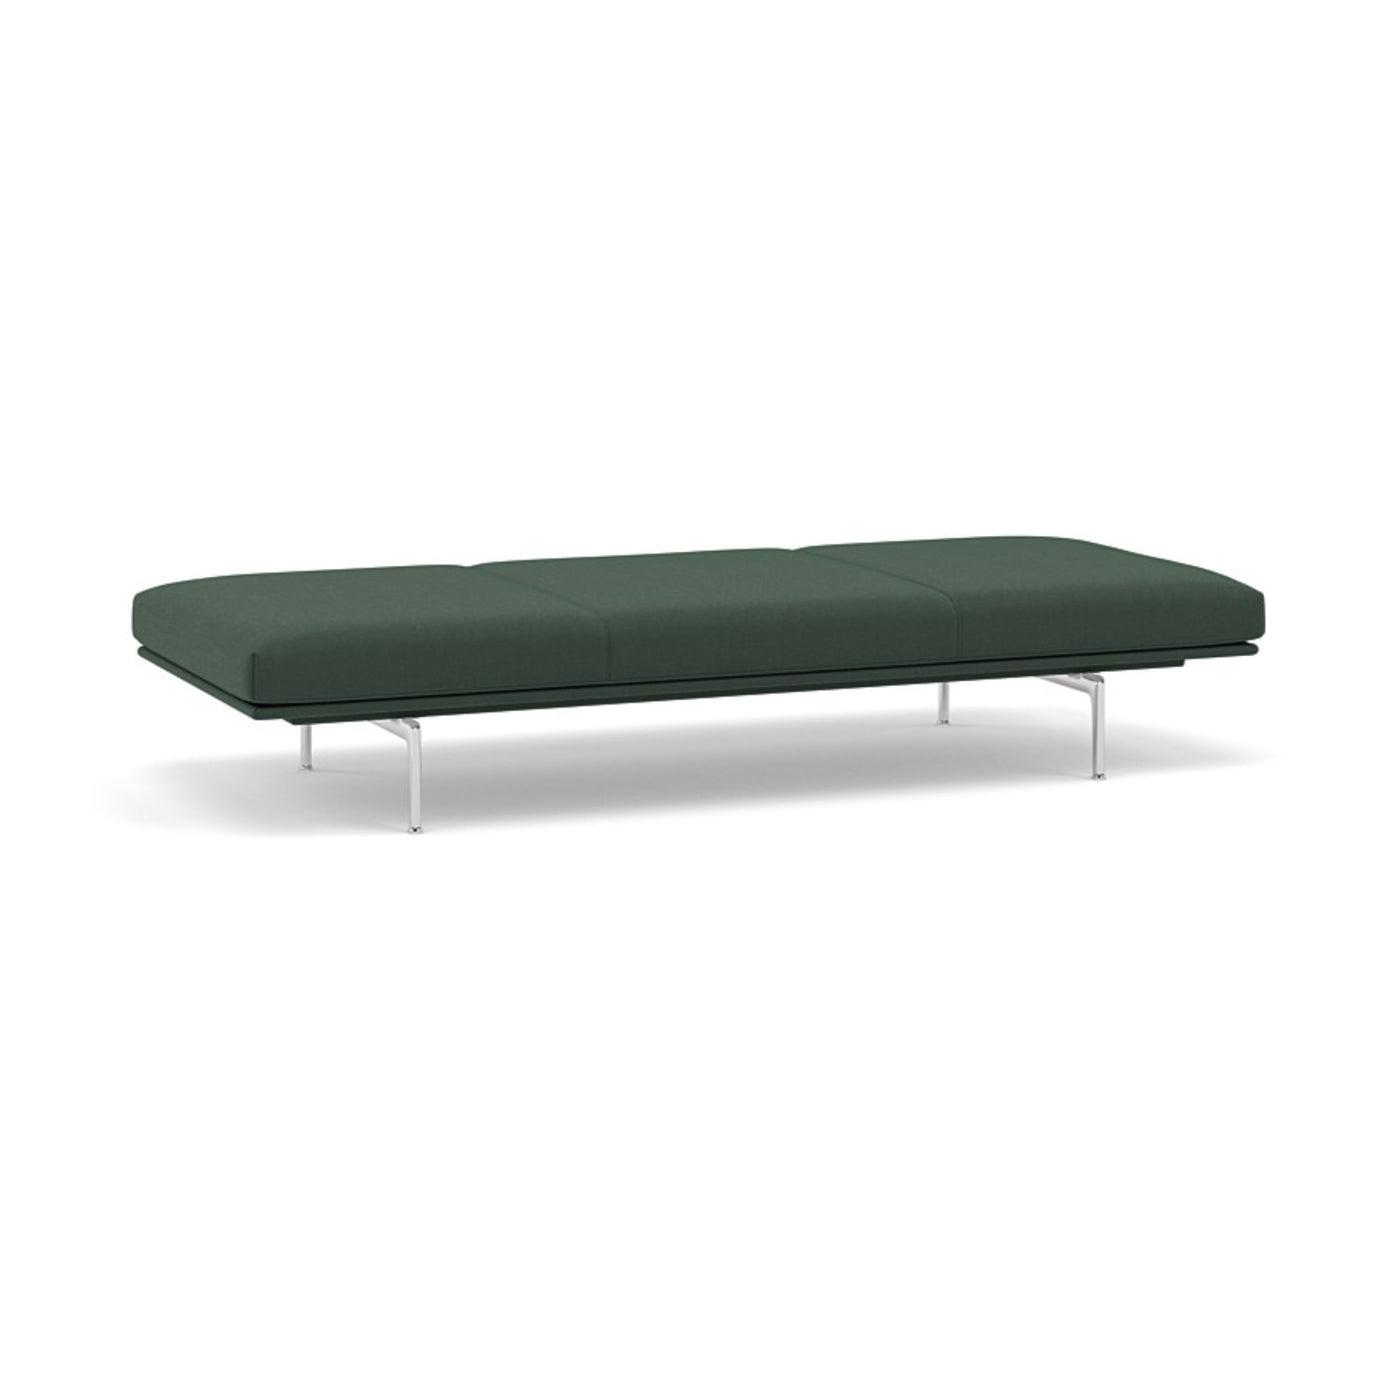 Muuto Outline Daybed, made to order from someday designs.#colour_twill-weave-990